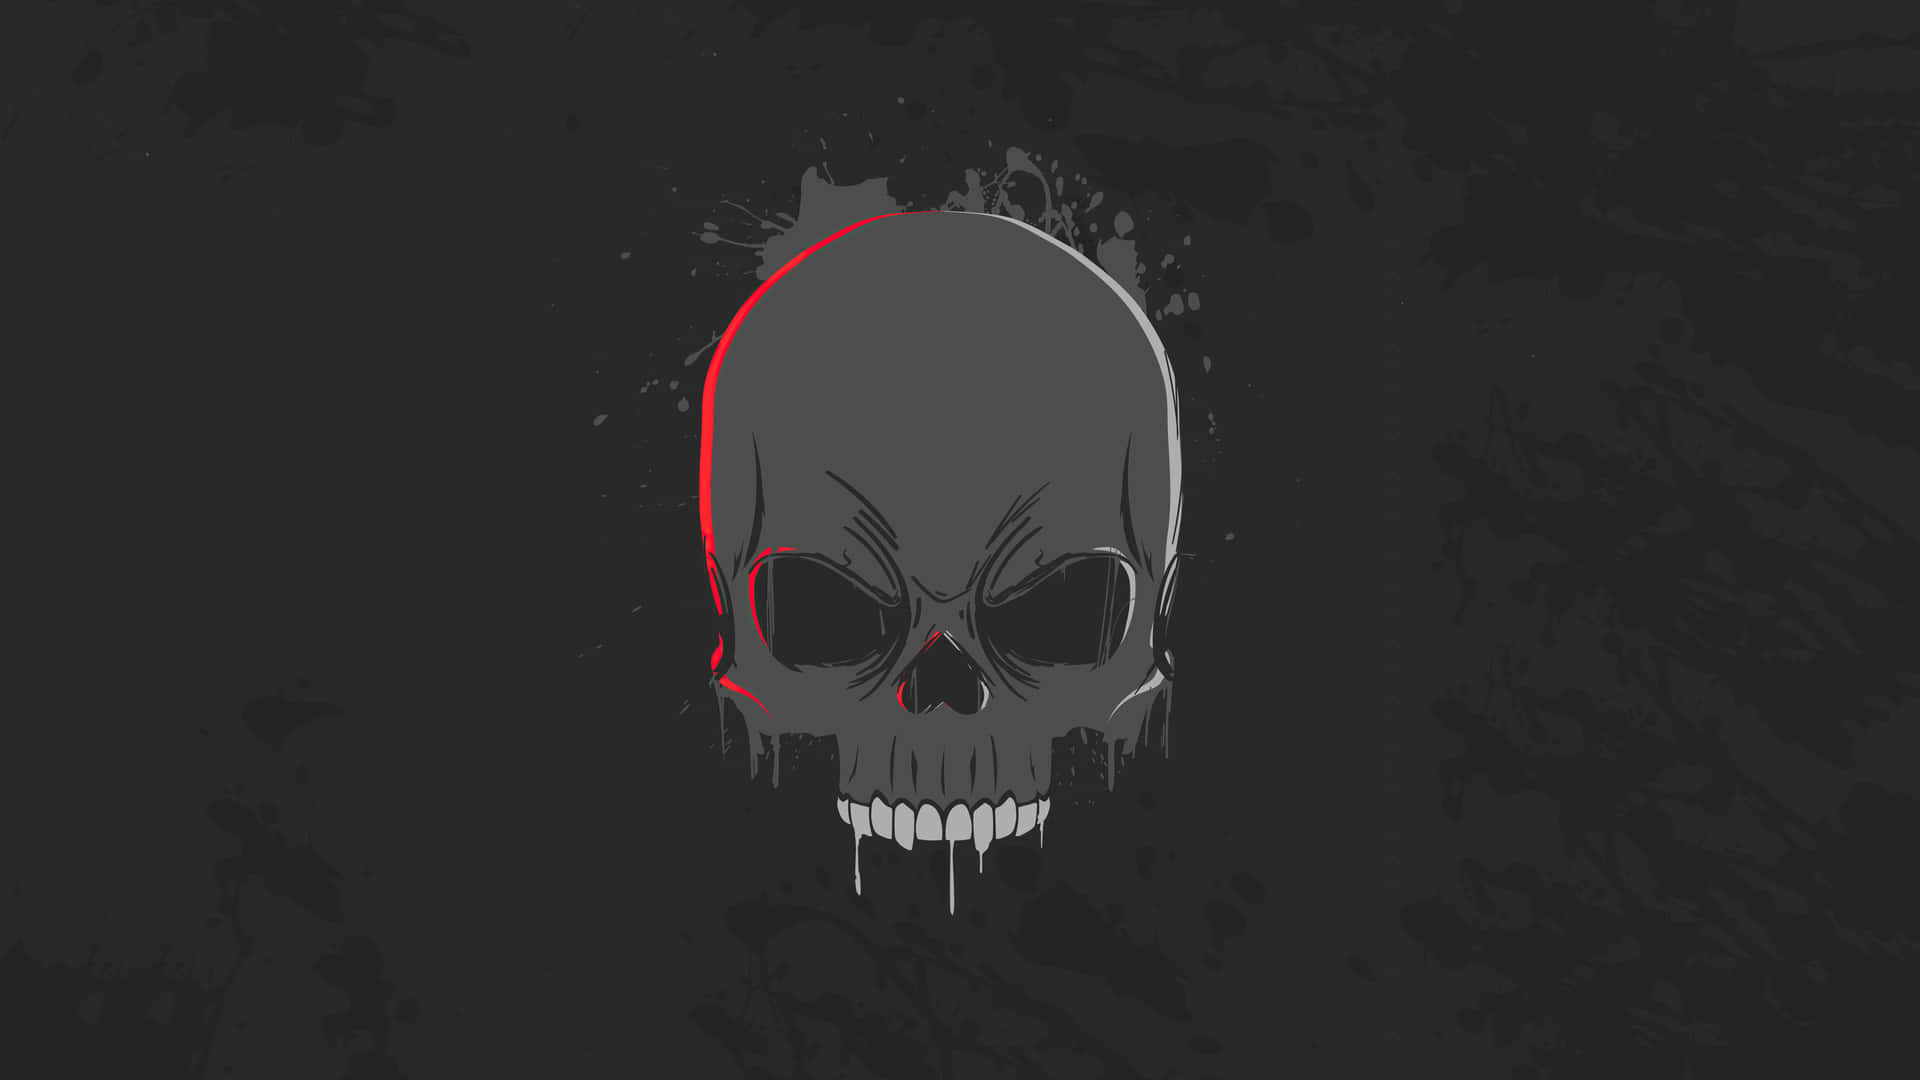 Let's get spooky with this Awesome Skull Wallpaper